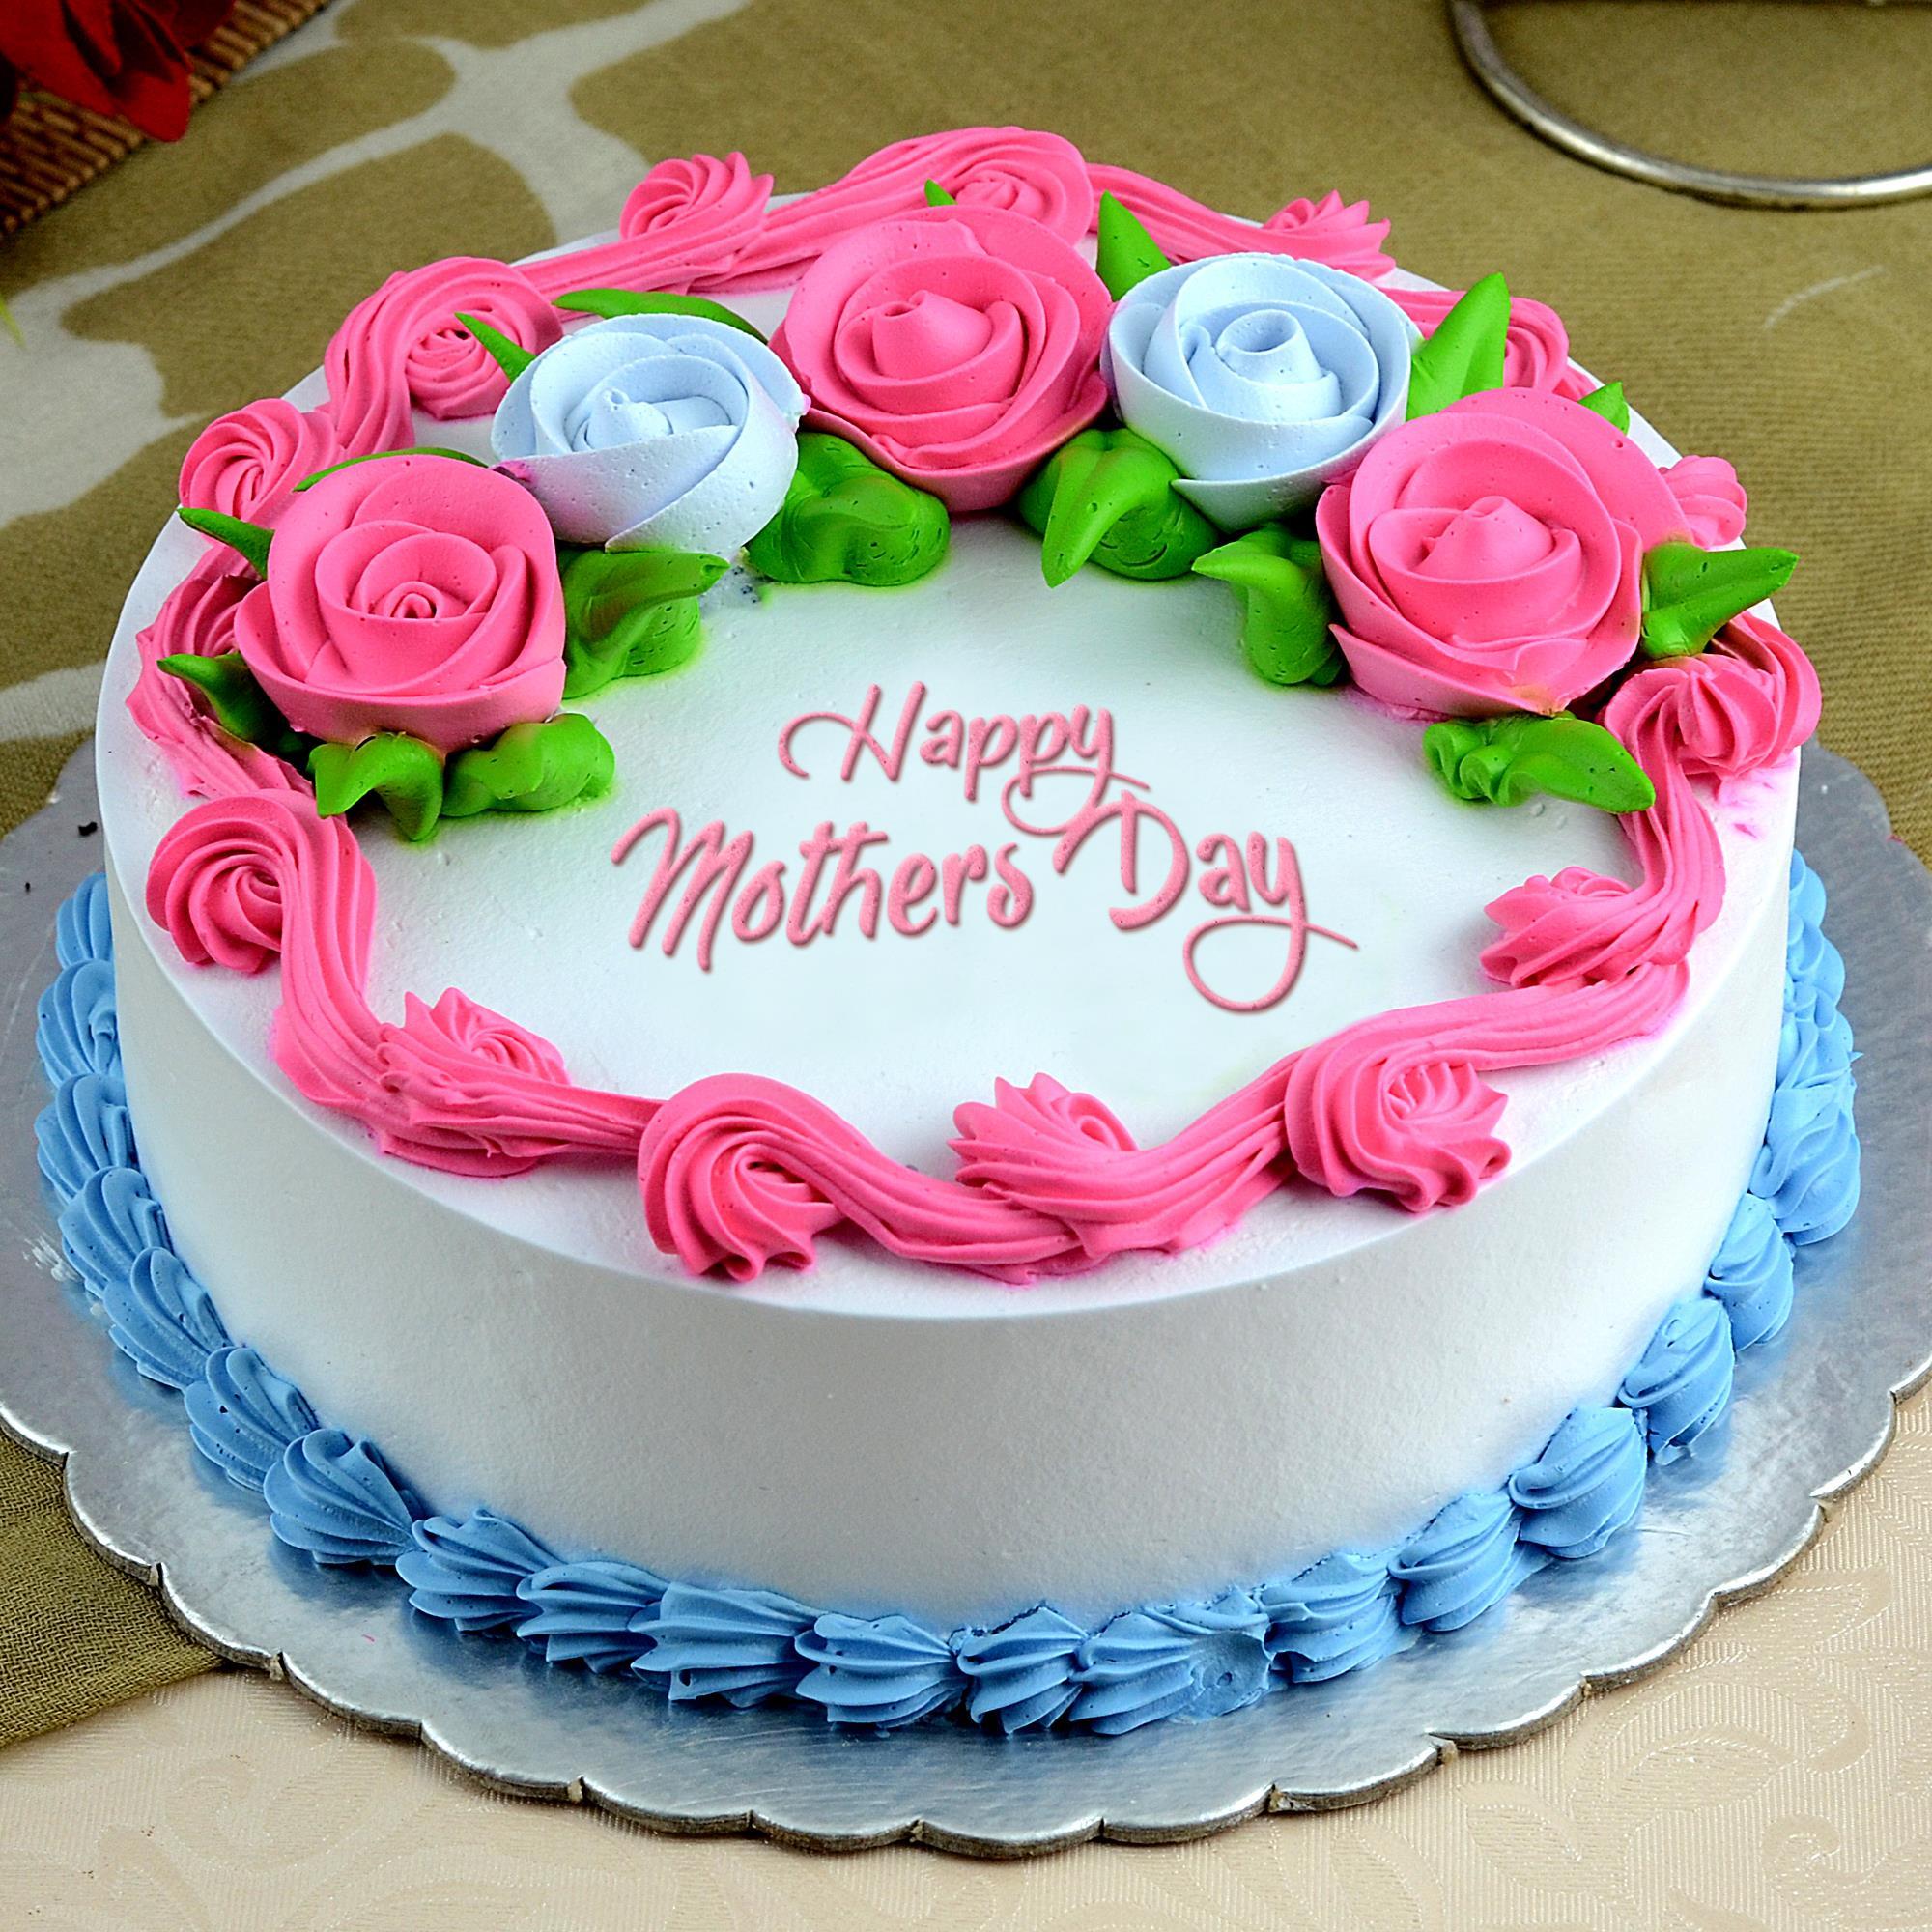 Chocolate Cake for Mother | Buy, Send or Order Online | Winni.in | Winni.in